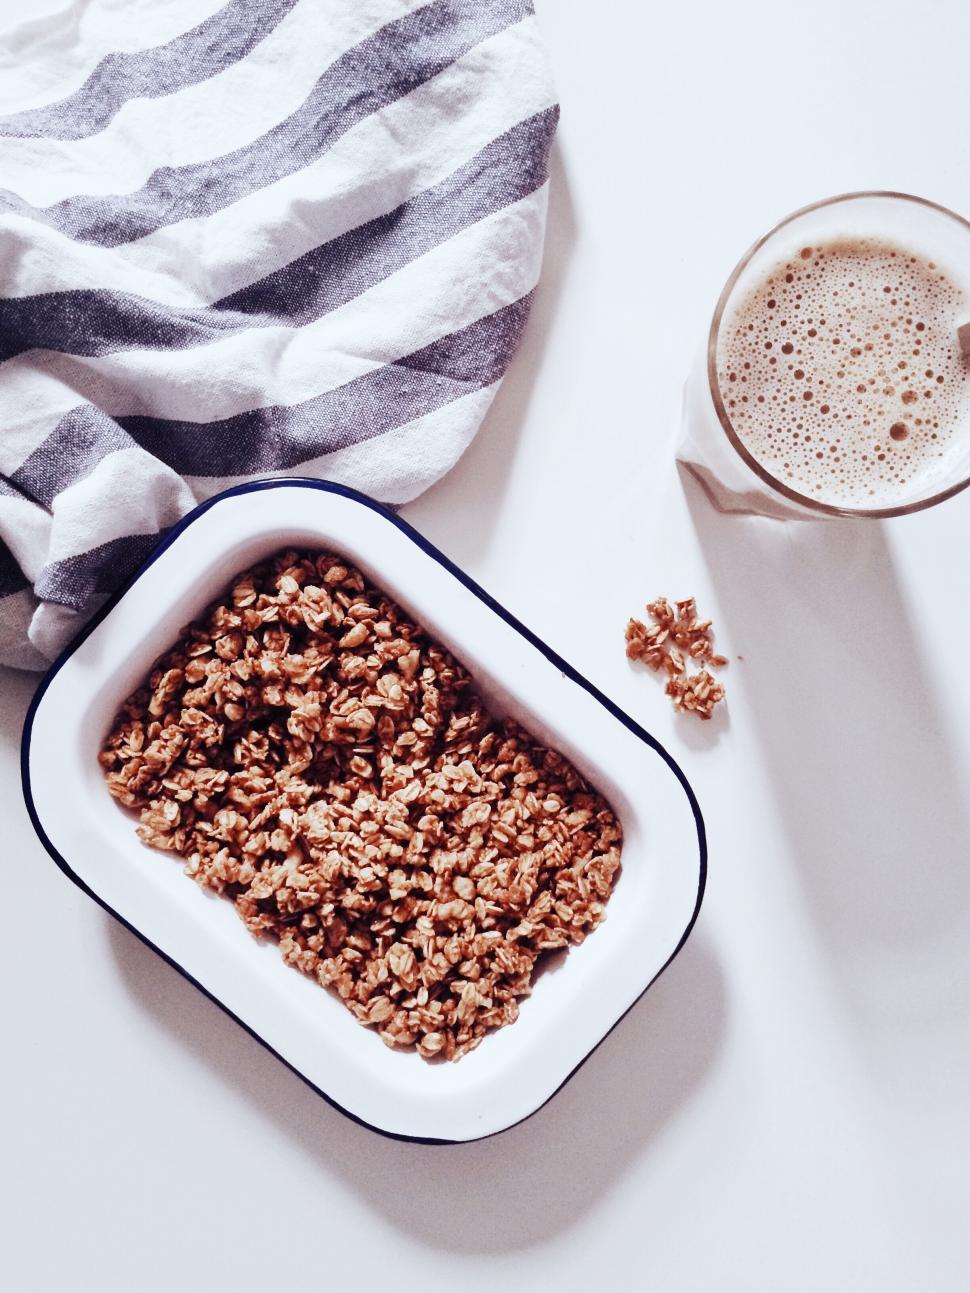 Free Image of Granola in bowl with coffee on table 